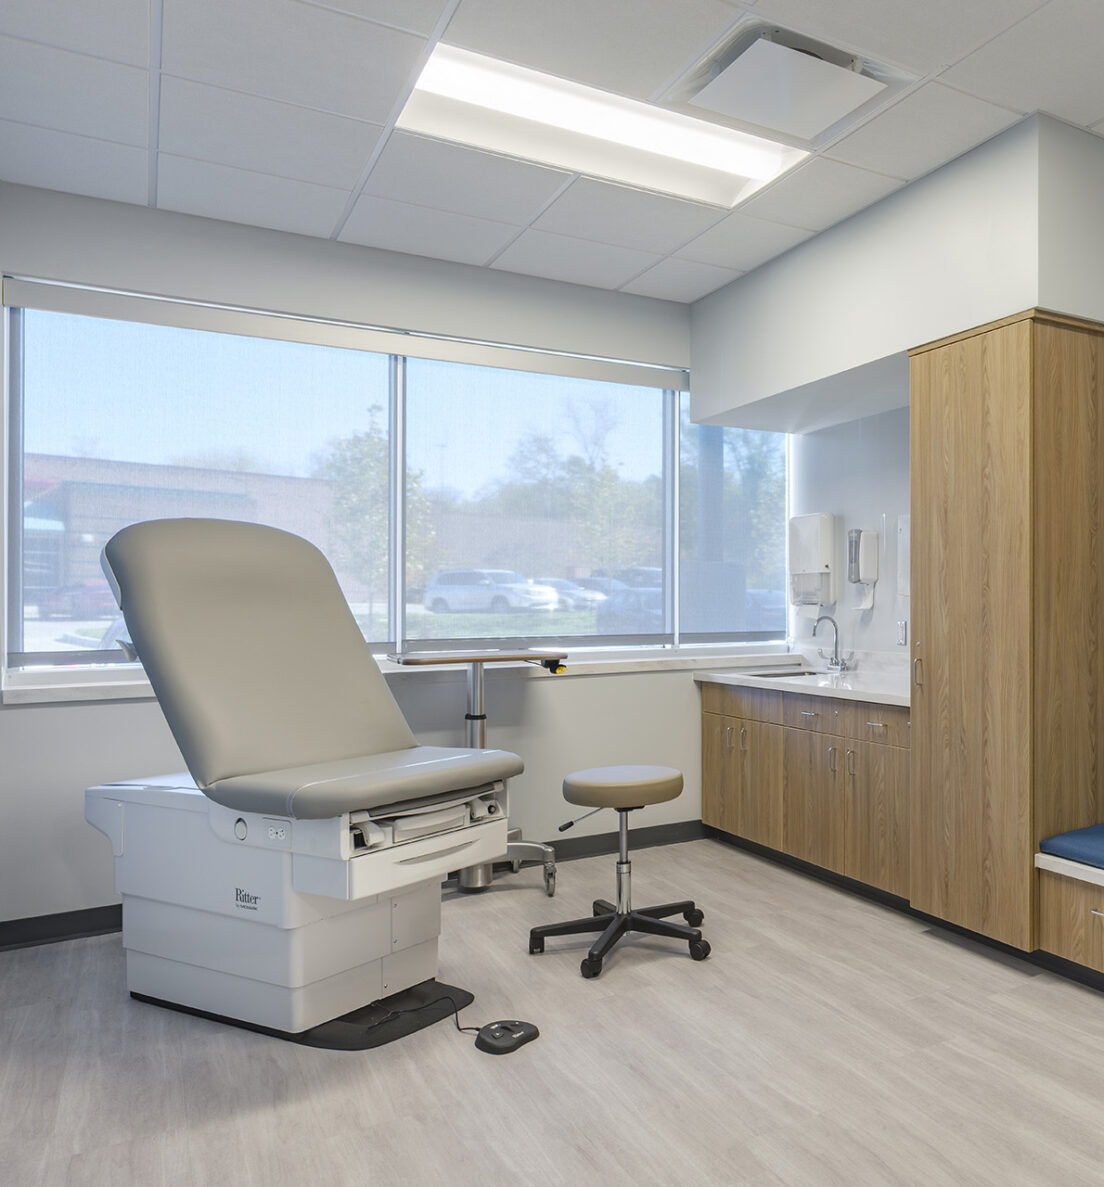 Patient room at PACE KC Swope Health Adult Wellness Center, built by McCownGordon